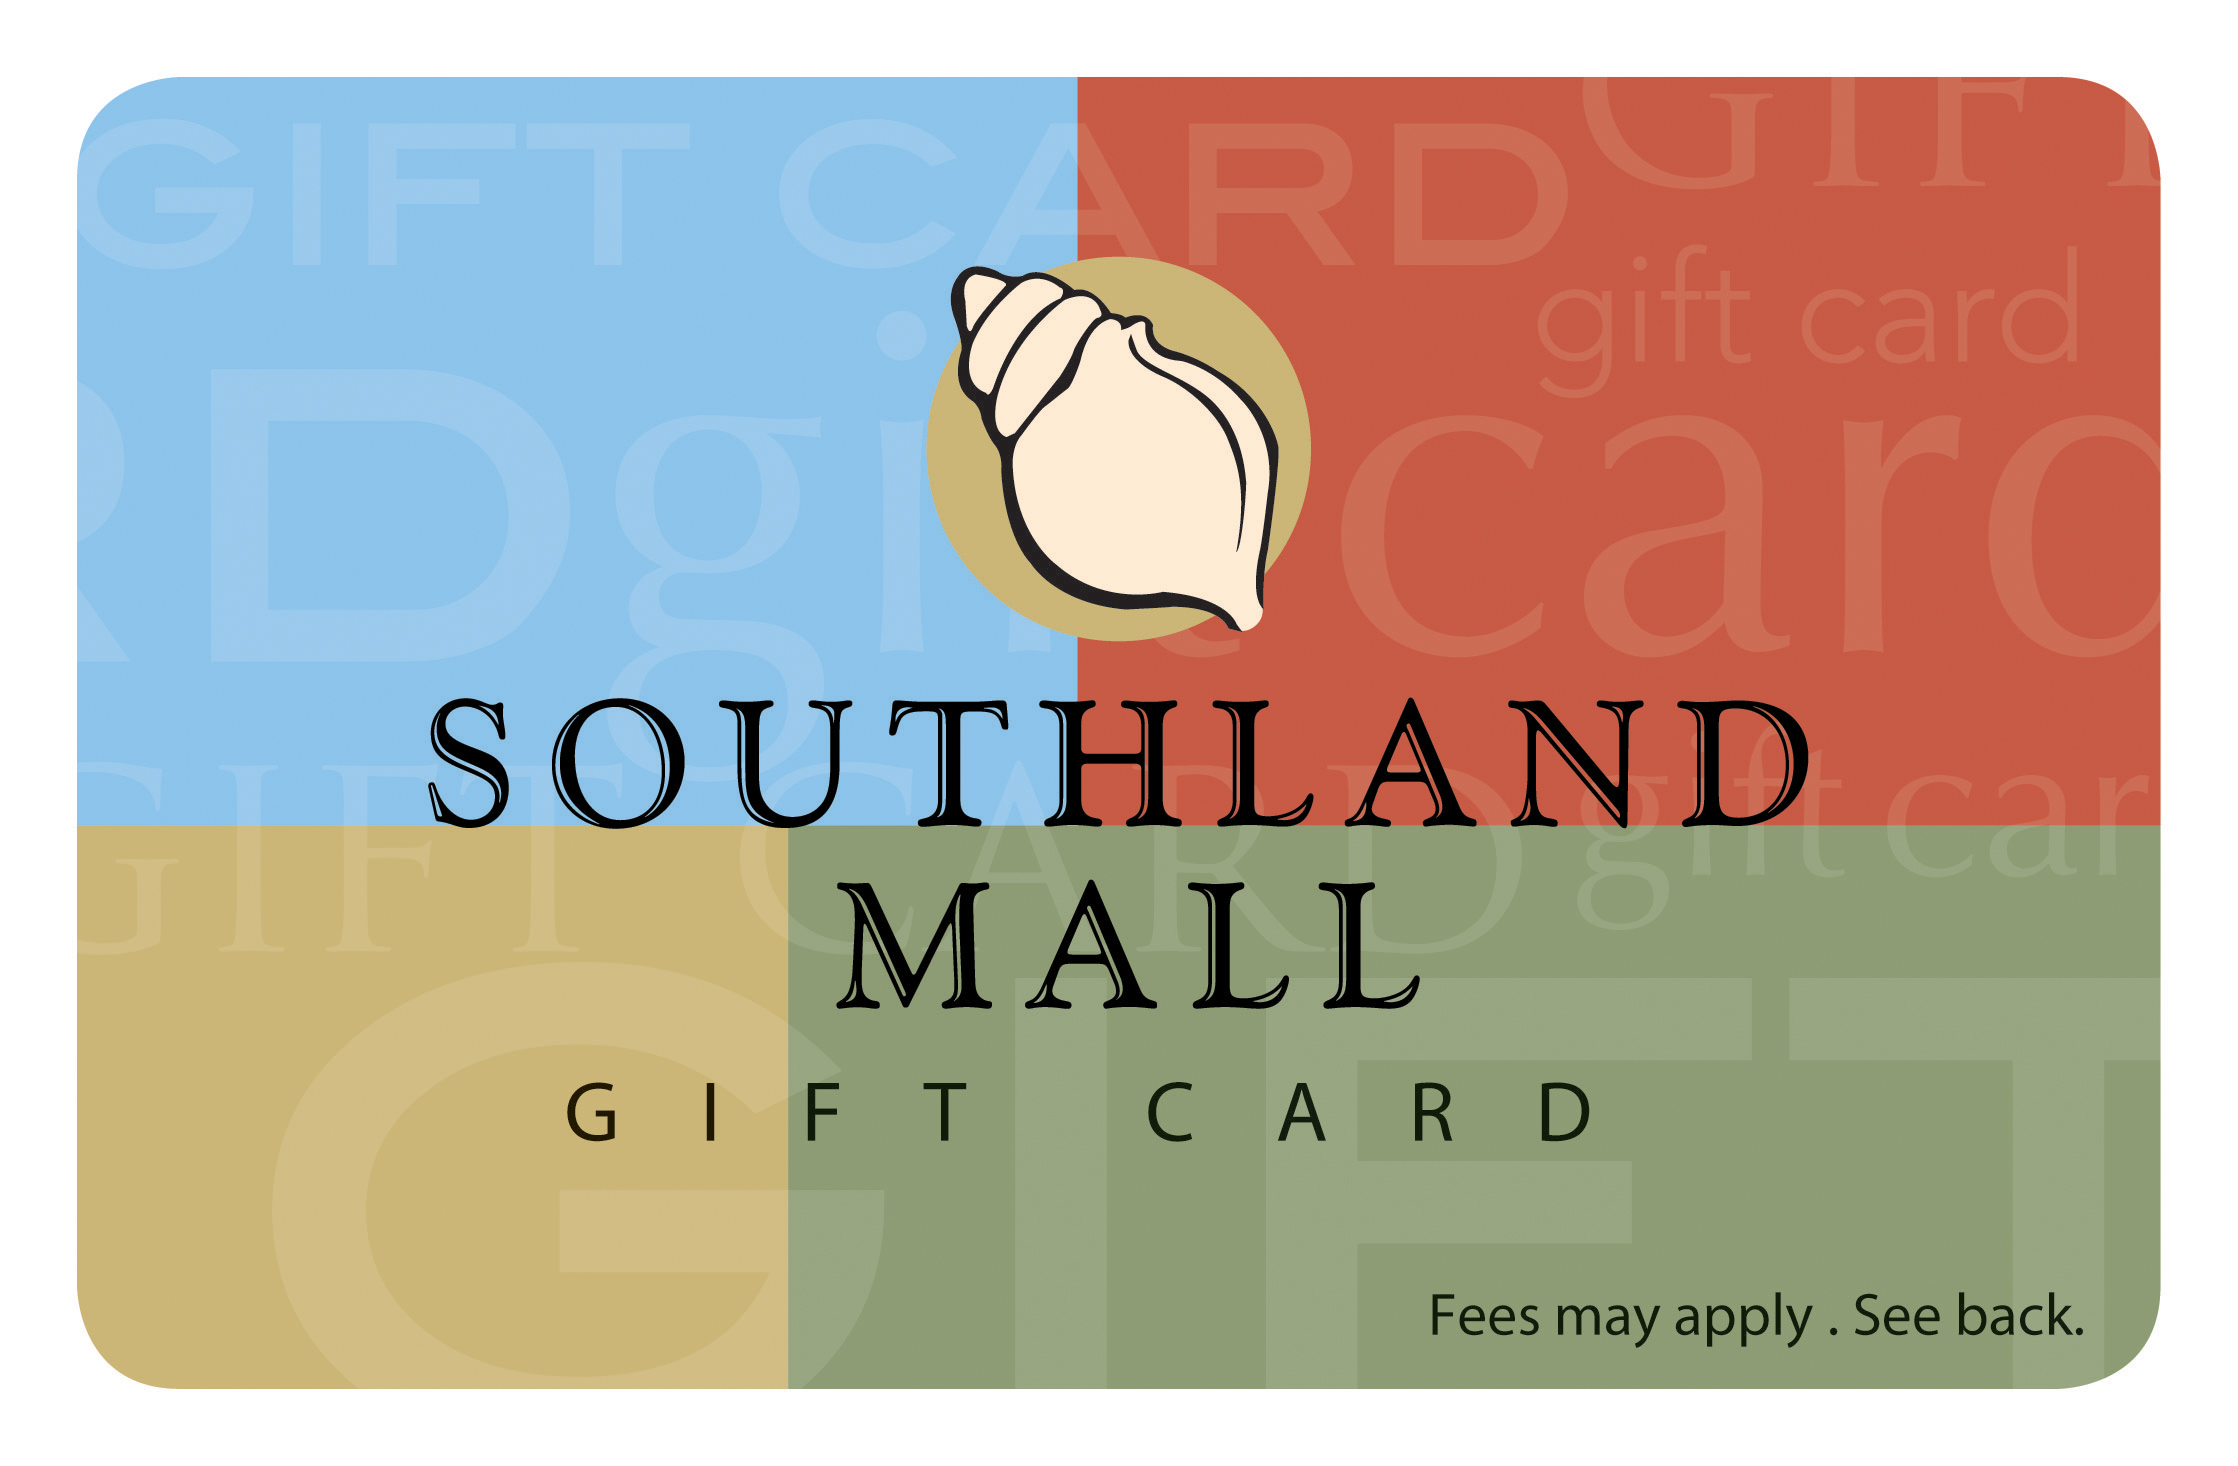 Southland Mall Gift Card